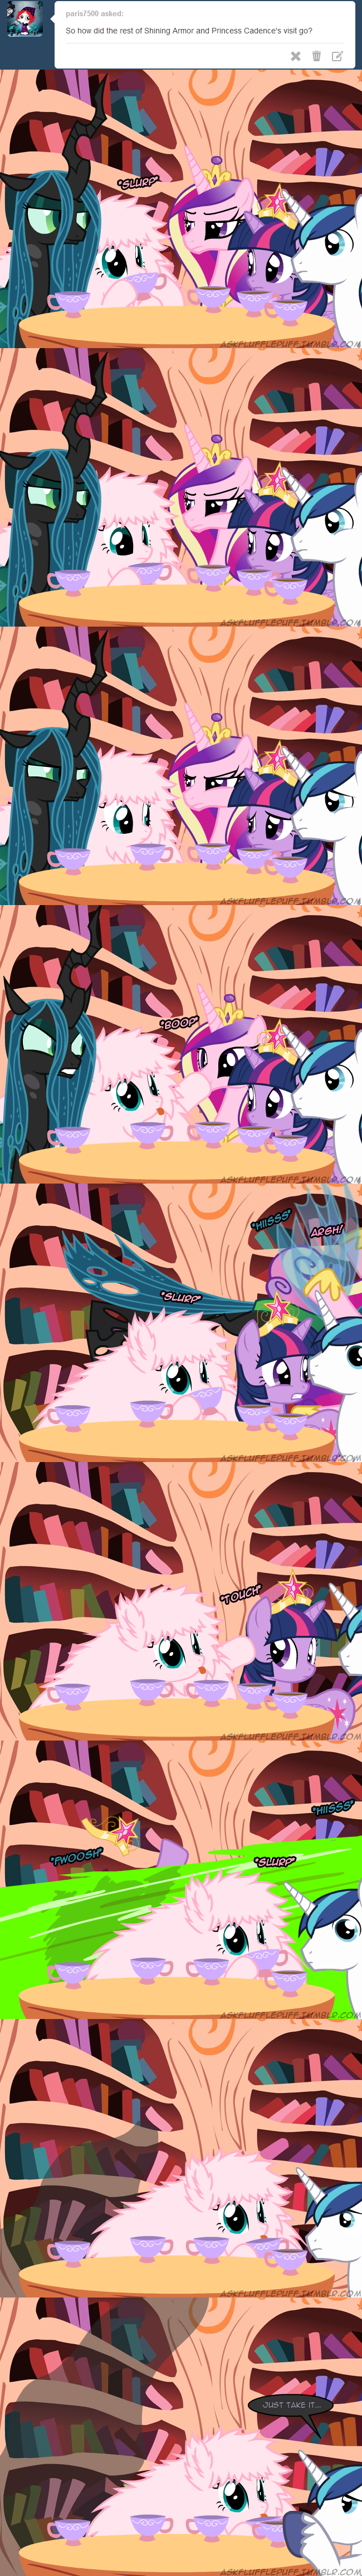 blue_eyes boop changeling comic crown english_text equine female fluffle_puff fluffy friendship_is_magic fur green_eyes green_hair hair horn horse male mammal mixermike622 multi-colored_hair my_little_pony pink_fur pink_hair pony princess_cadance_(mlp) purple_eyes purple_fur queen_chrysalis_(mlp) royalty shining_armor_(mlp) sibling text tiara tongue tongue_out tumblr twilight_sparkle_(mlp) two_tone_hair unicorn white_fur wings